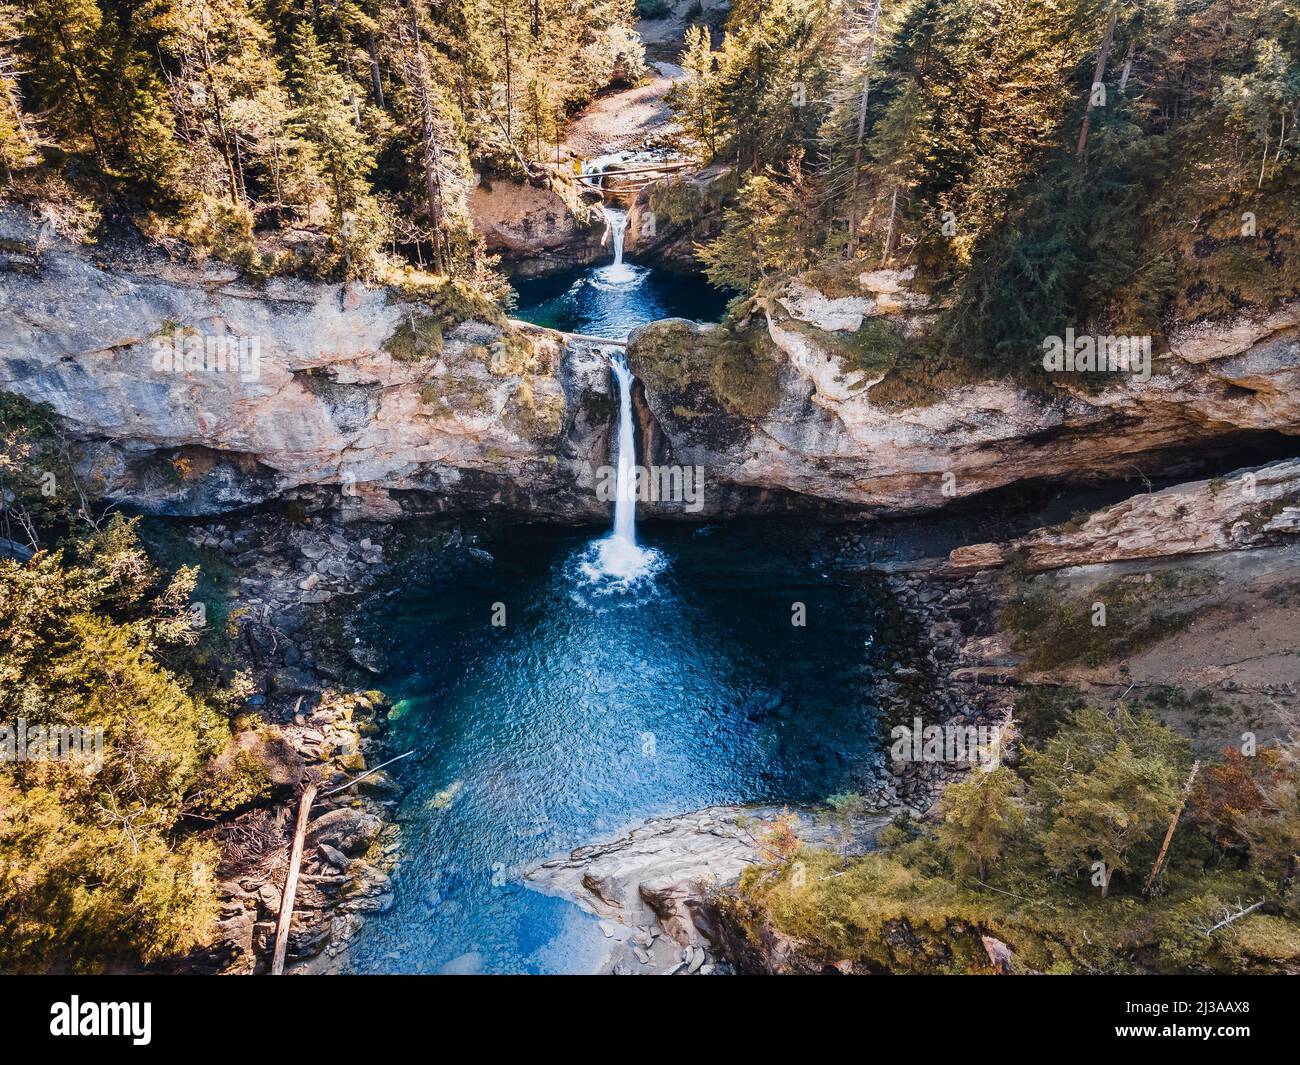 An aerial view of Buchenegger Wasserfalle, Buchenegger Waterfall on a sunny day in Oberstaufen, Germany Stock Photo